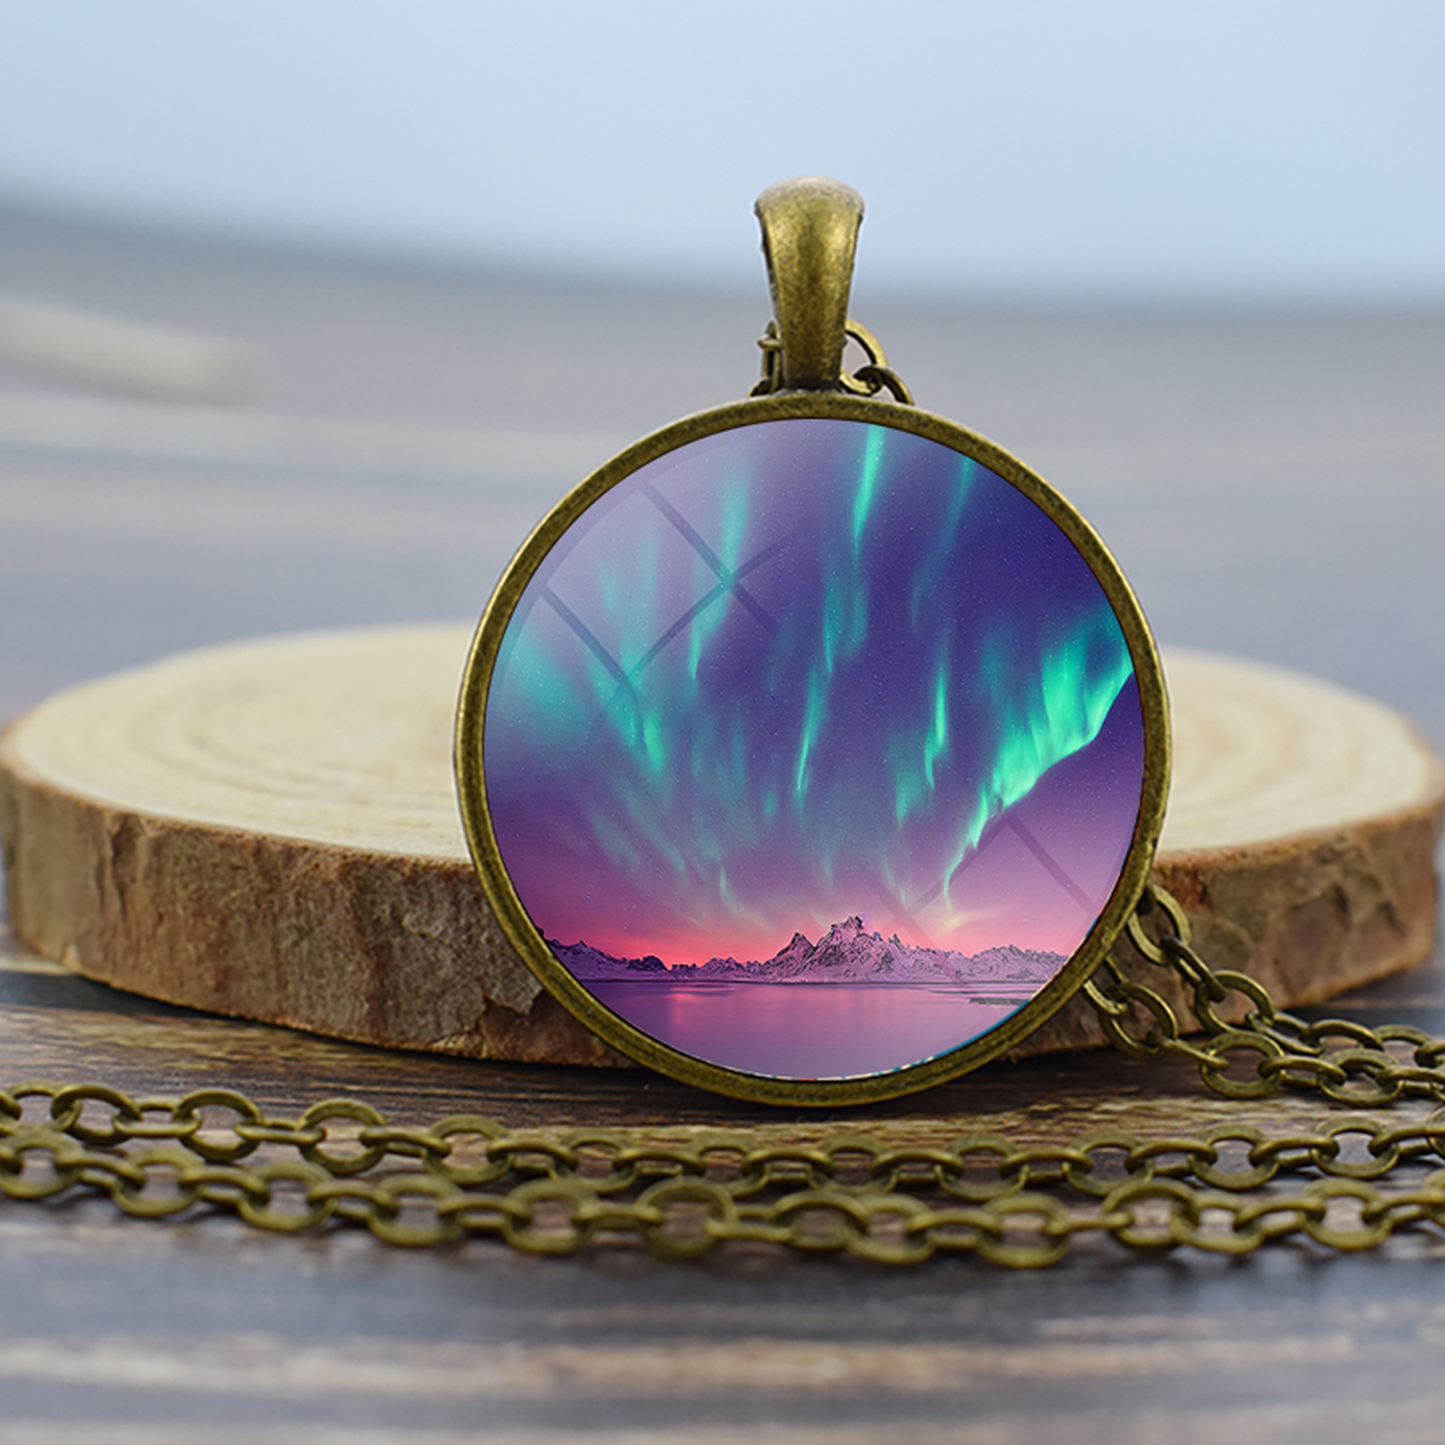 Unique Aurora Borealis Bronze Necklace - Northern Light Jewelry - Glass Dome Pendent Necklace - Perfect Aurora Lovers Gift 2